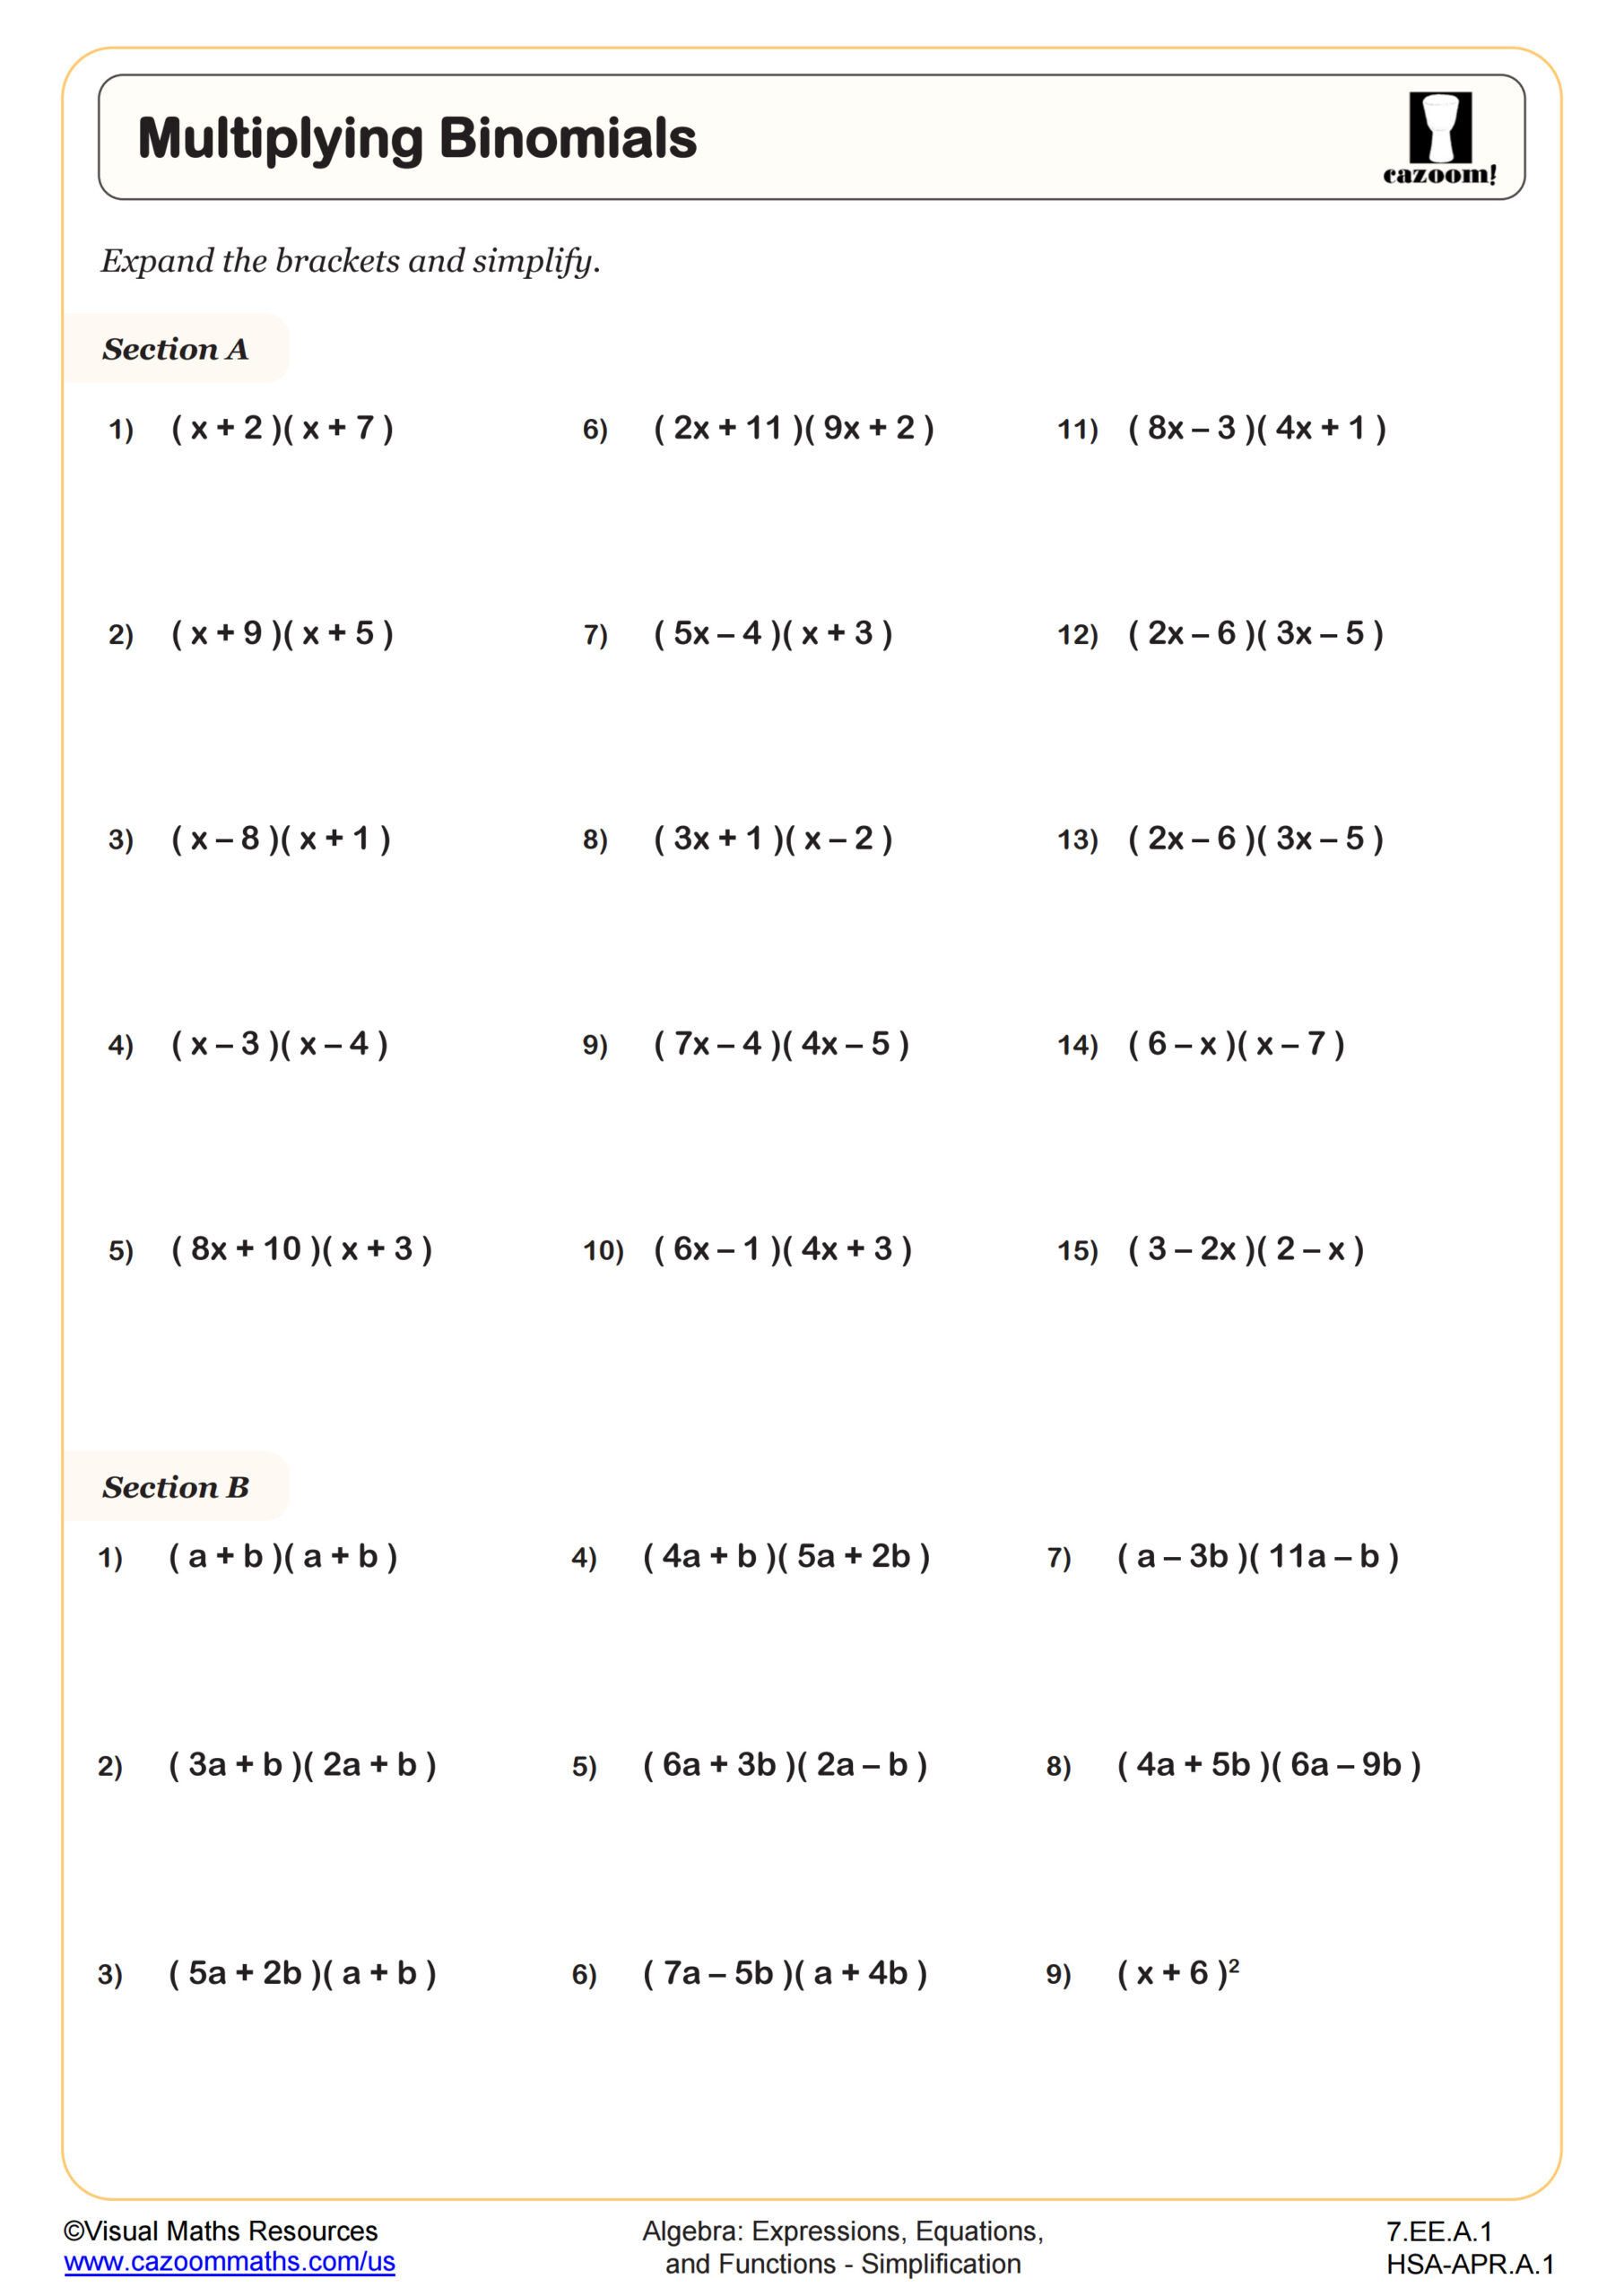 7Th Grade Math Worksheets Pdf | Printable Worksheets regarding 7Th Grade Math Worksheets Free Printable With Answers